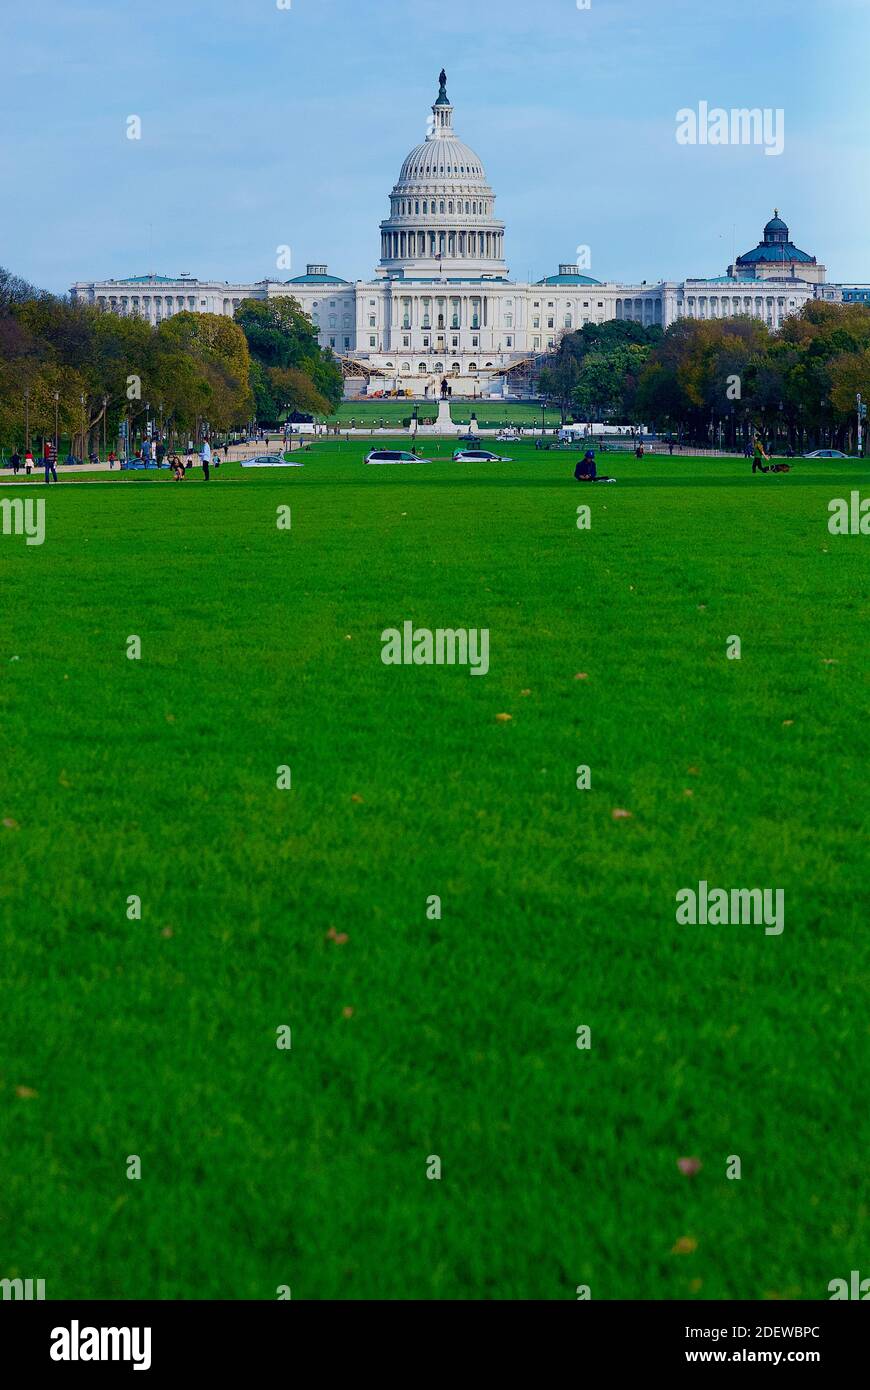 Washington, D.C. - November 3, 2020: Tourists enjoy an autumn afternoon on the National Mall with the United States Capitol building in the background. Stock Photo